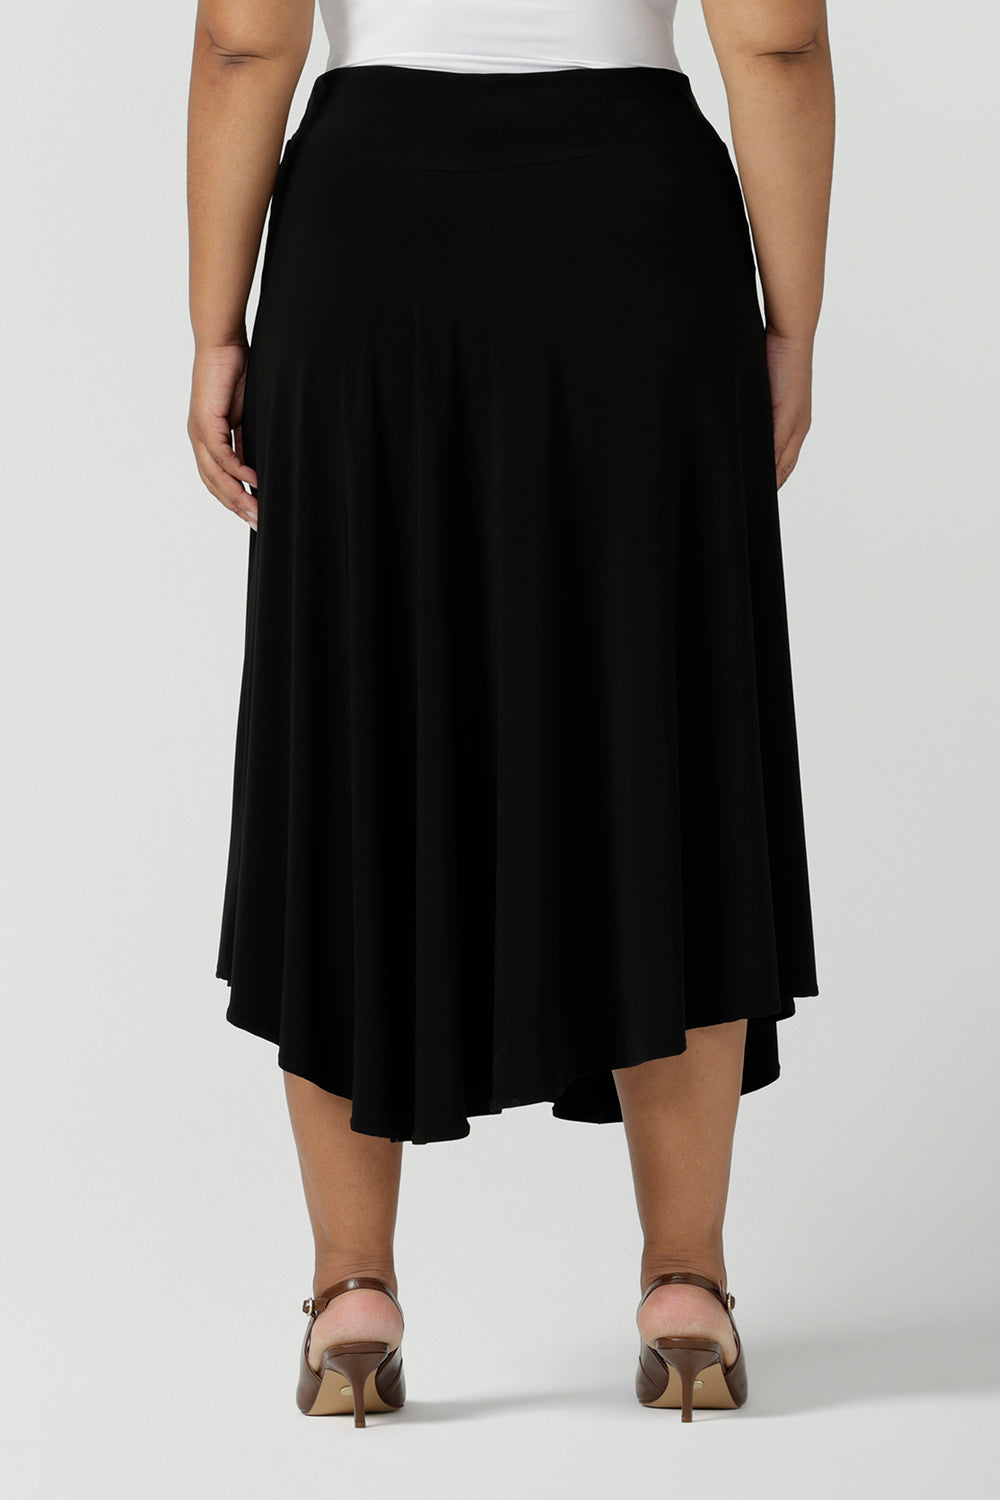 Back view of a size 18, plus size woman wears an asymmetric skirt in black jersey. This easy-care, comfortable jersey skirt works for work wear and eveningwear. Made in Australia by women's clothing brand, Leina & Fleur in petite, mid size and plus sizes.